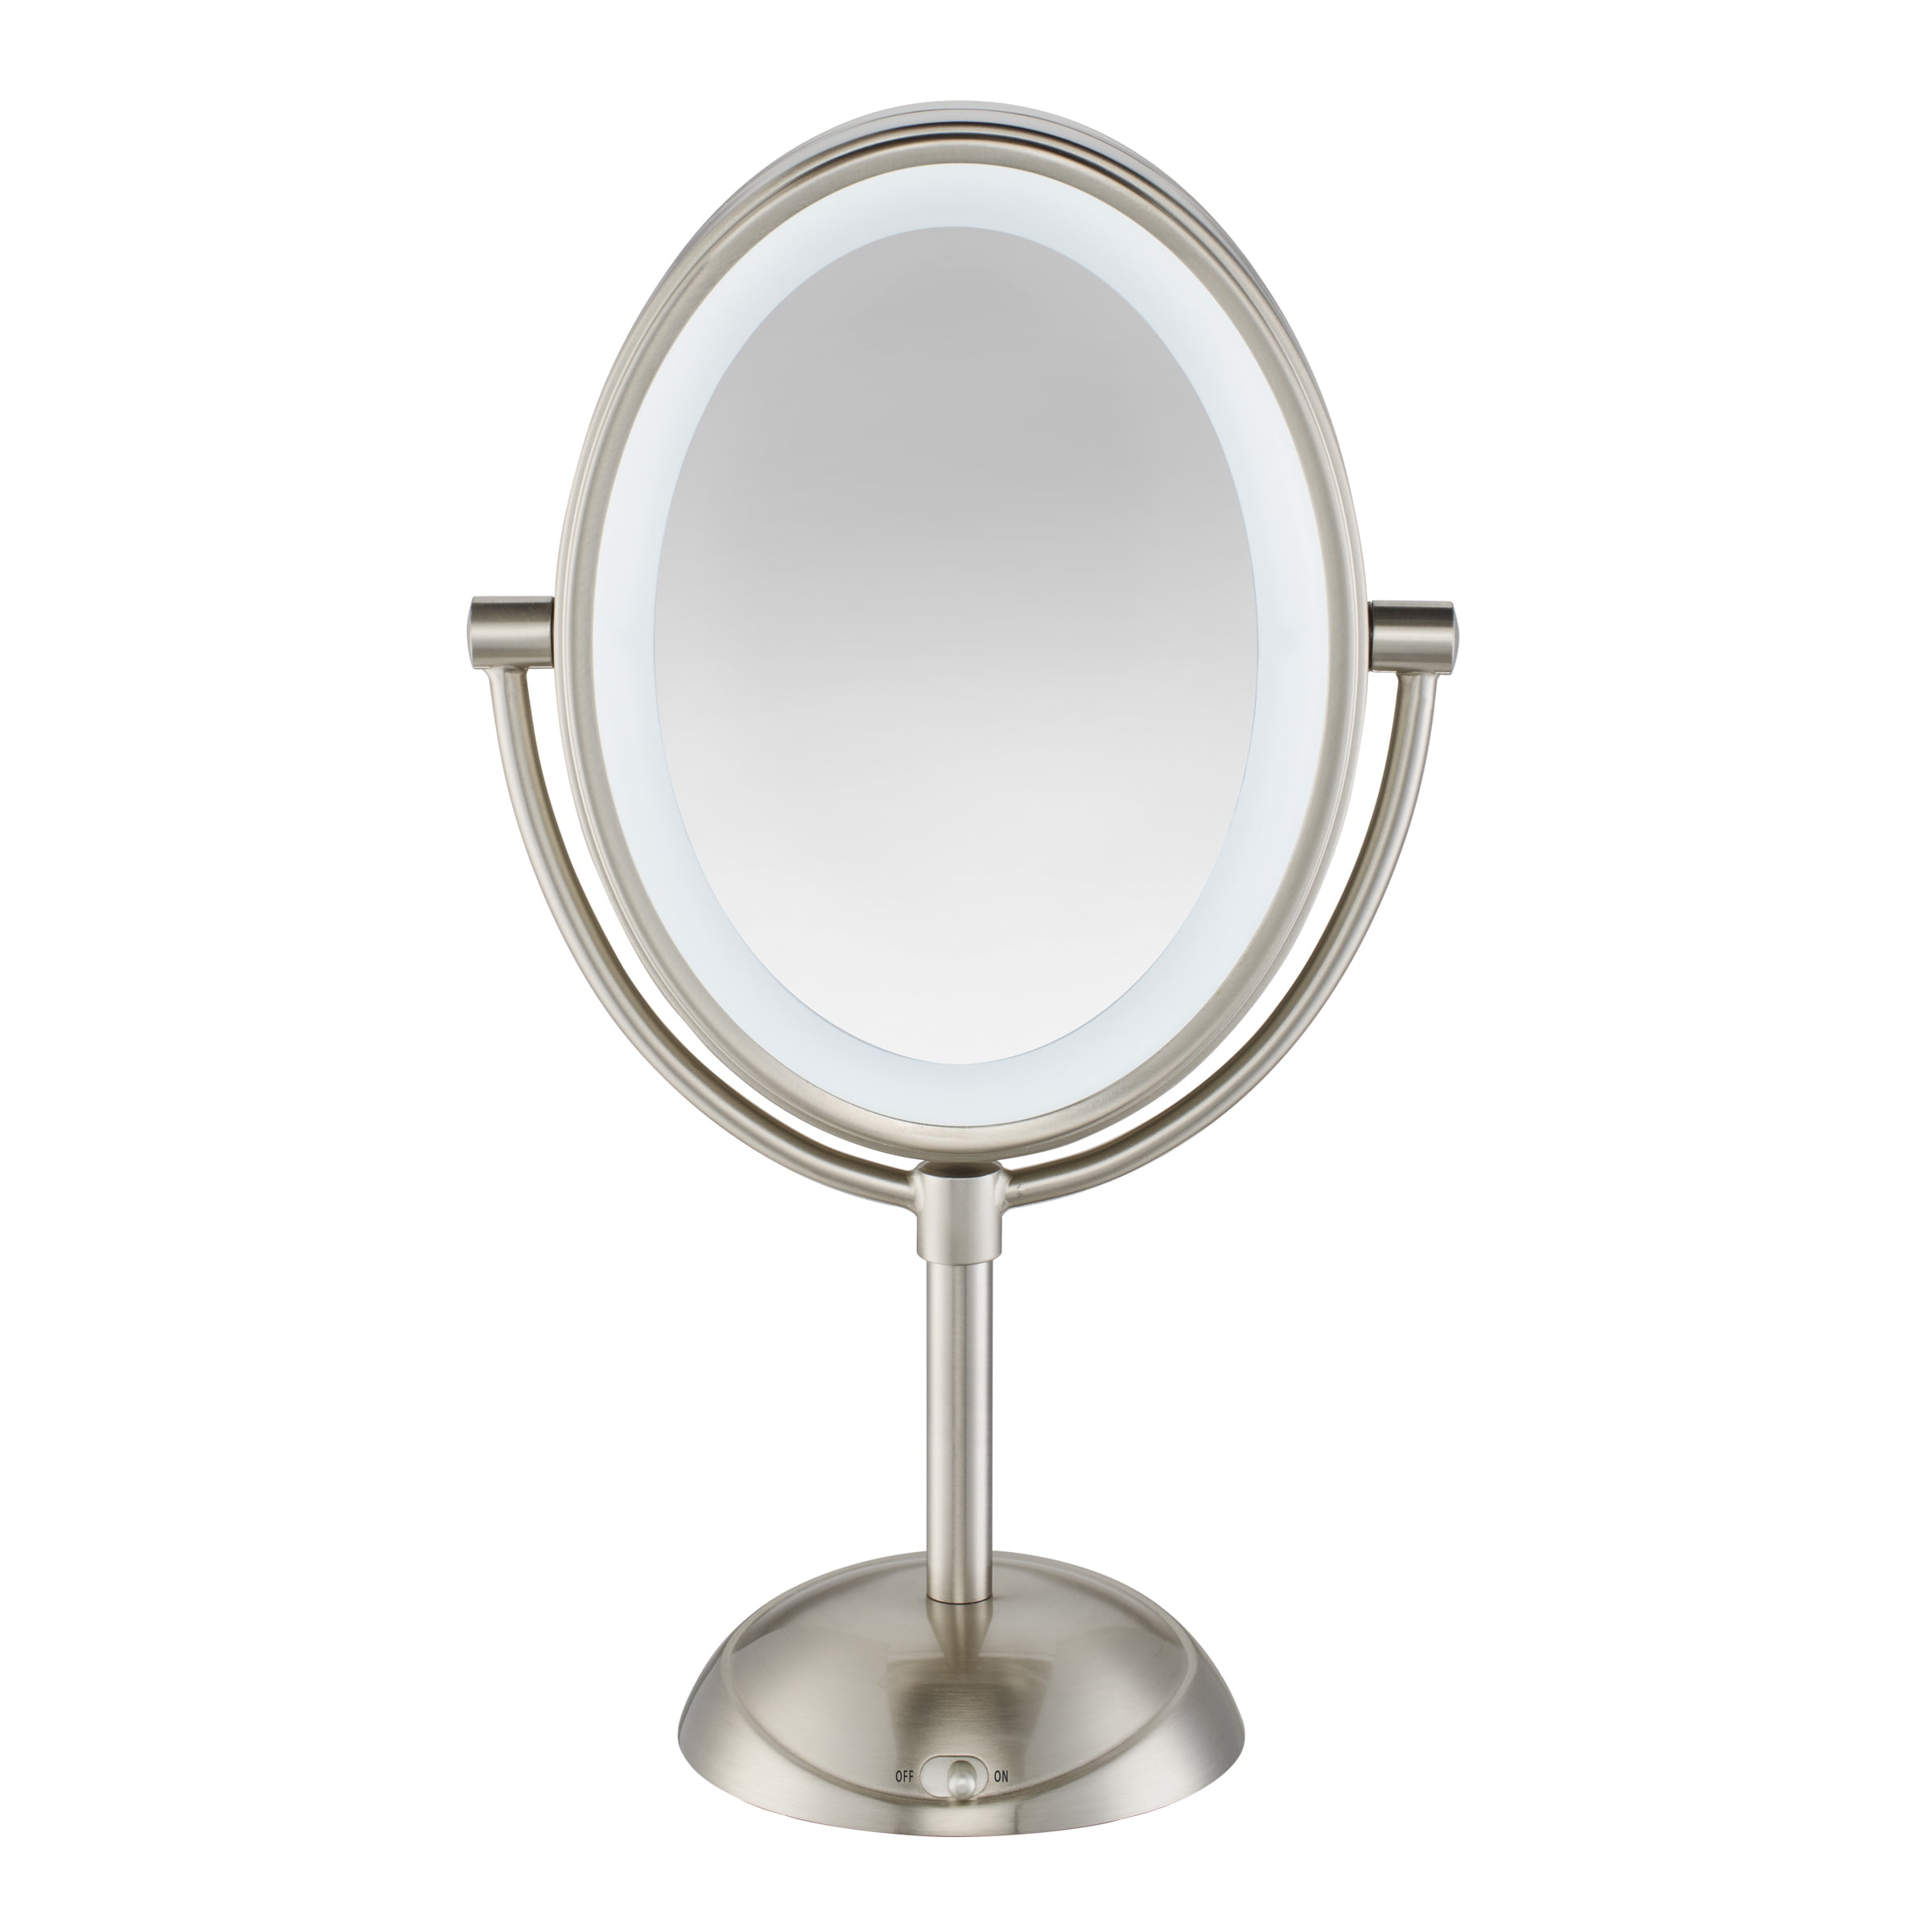 Double Sided Lighted Vanity Mirror, Conair Makeup Mirror With Light Settings